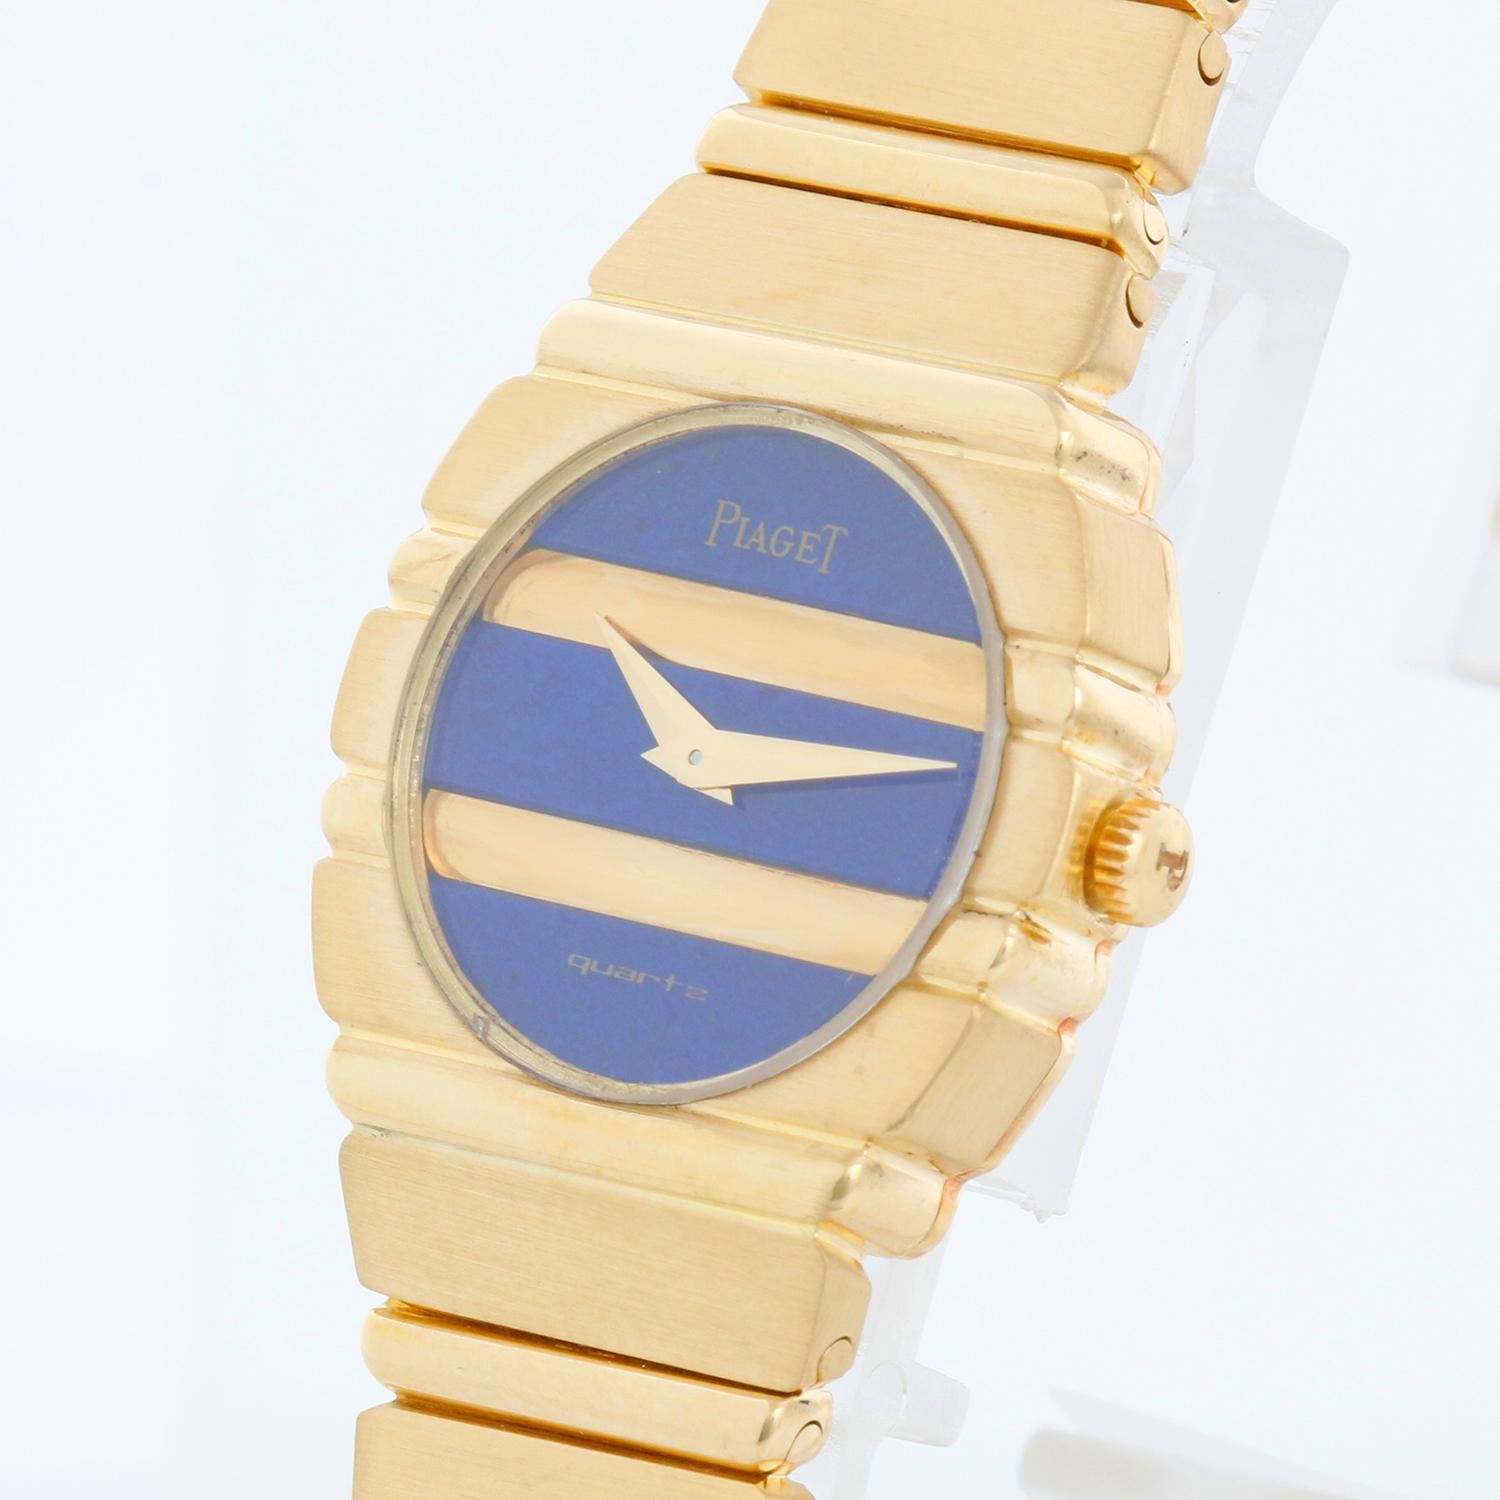 Piaget Polo 18K Yellow Gold Ladies Lapis Lazuli Watch 861 C 701 - Quartz. 18K Yellow Gold ( 25 x 25 mm ). Lapis Lazuli dial. 18K Yellow Gold bracelet; measures up to a 6 inch wrist. Pre-owned custom box.